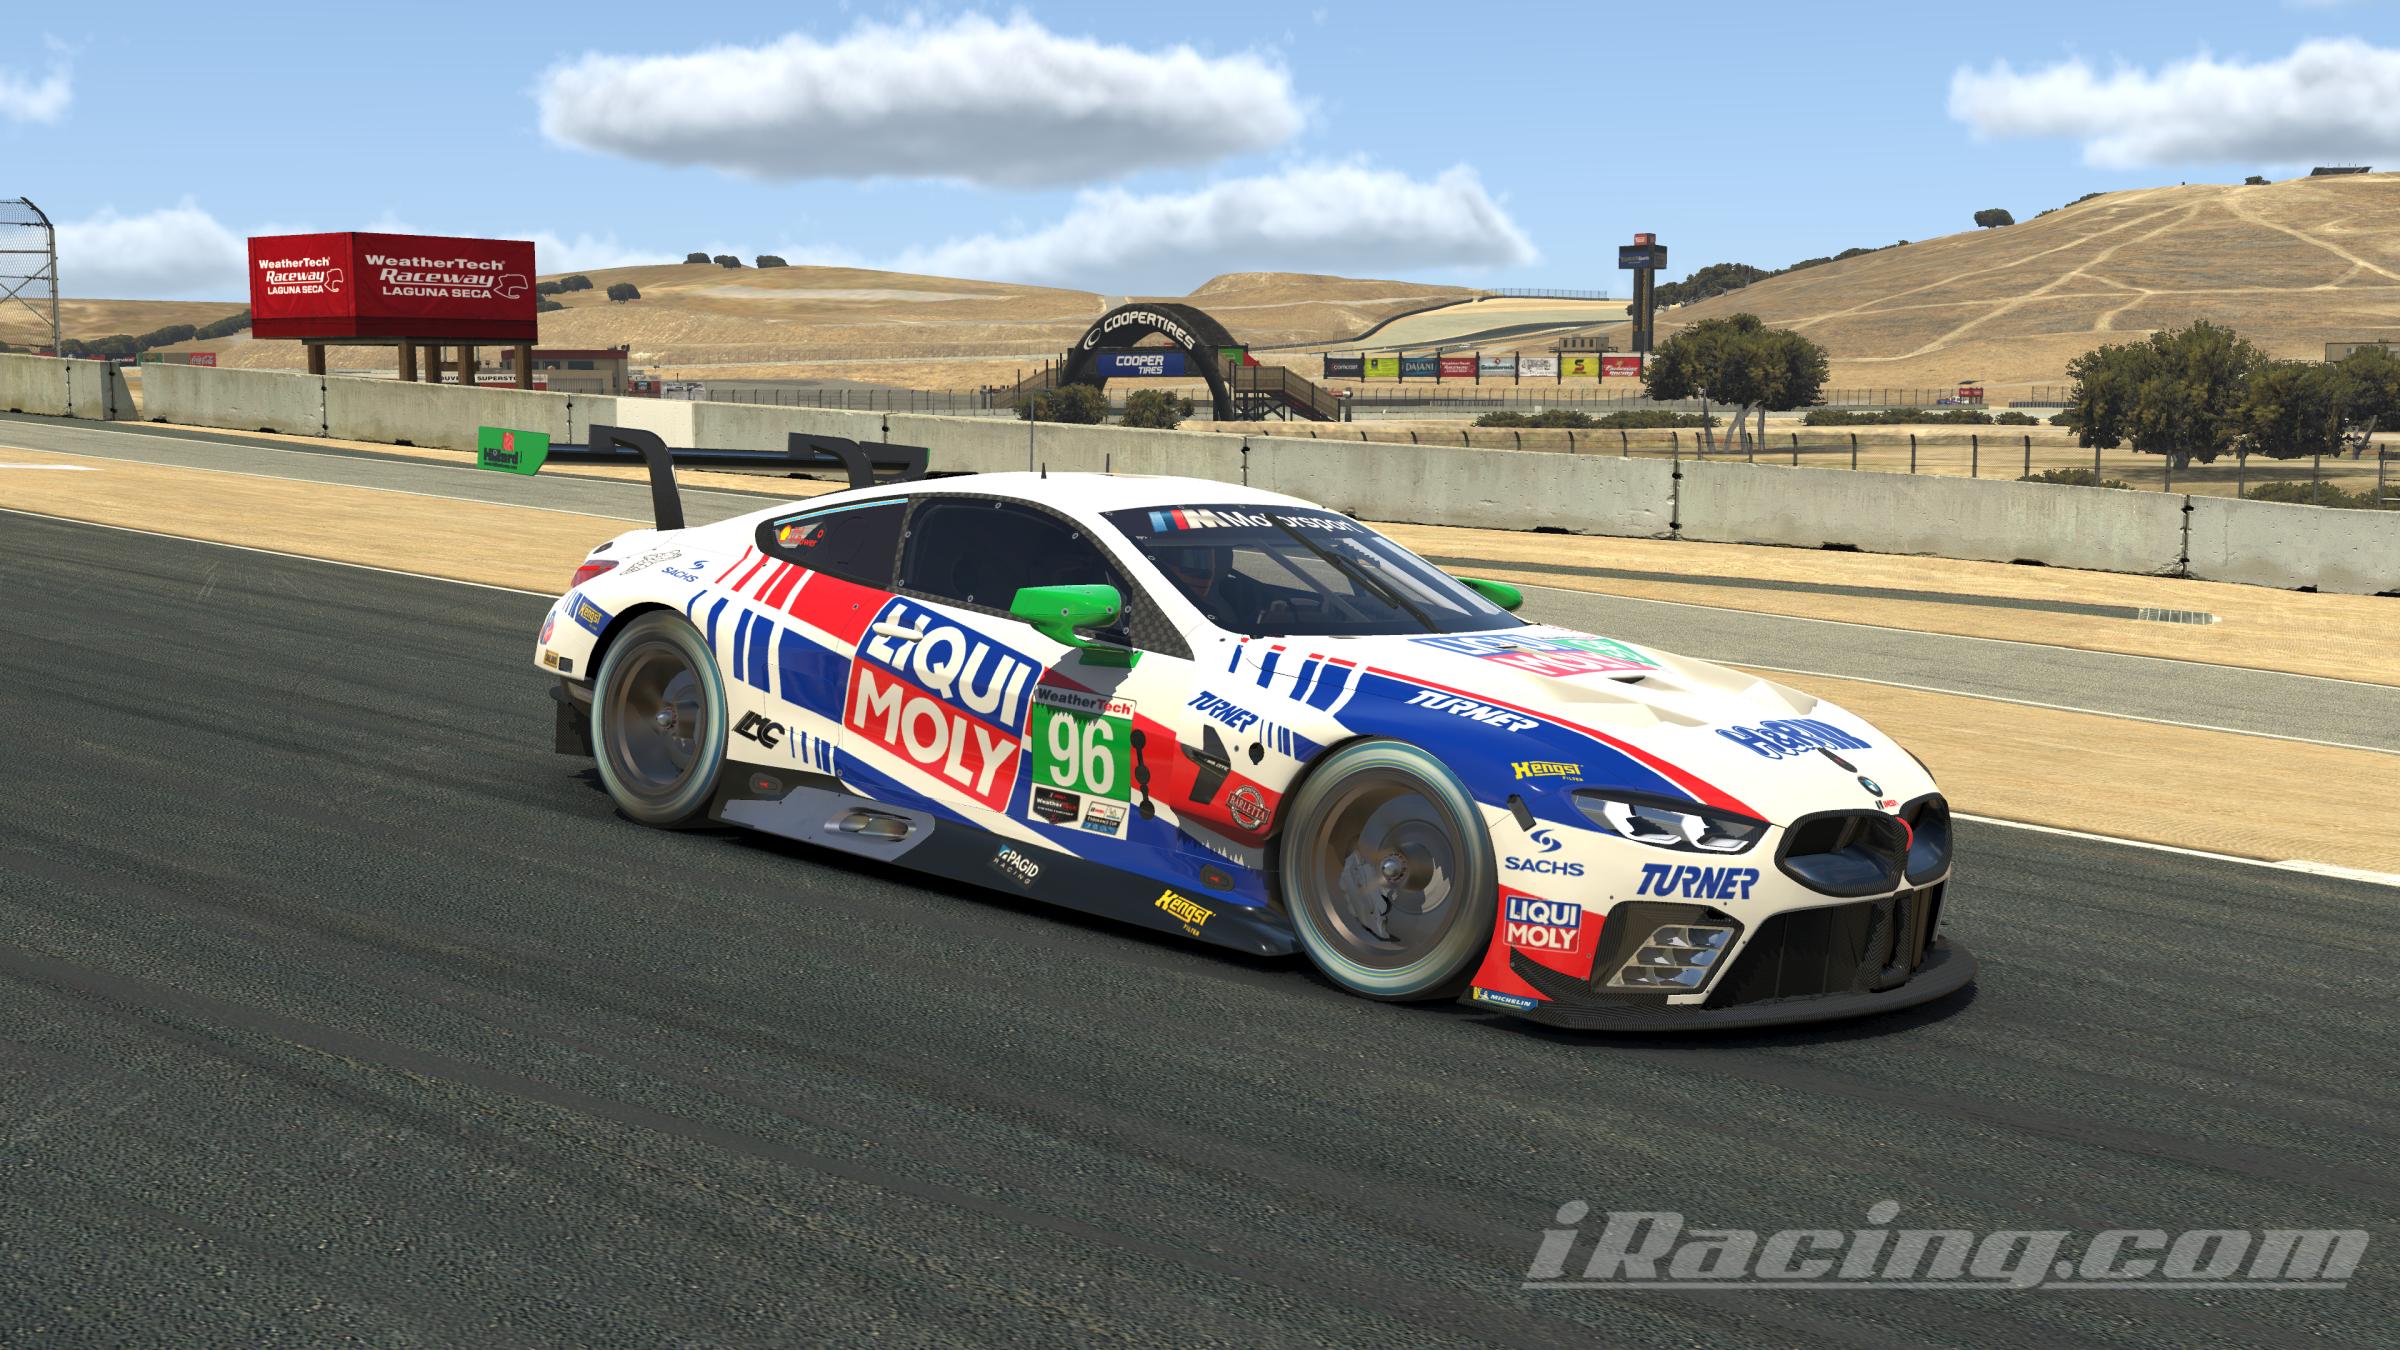 Preview of BMW M8 GTE - 2020 TURNER LIQUI MOLY by Andy Blackmore